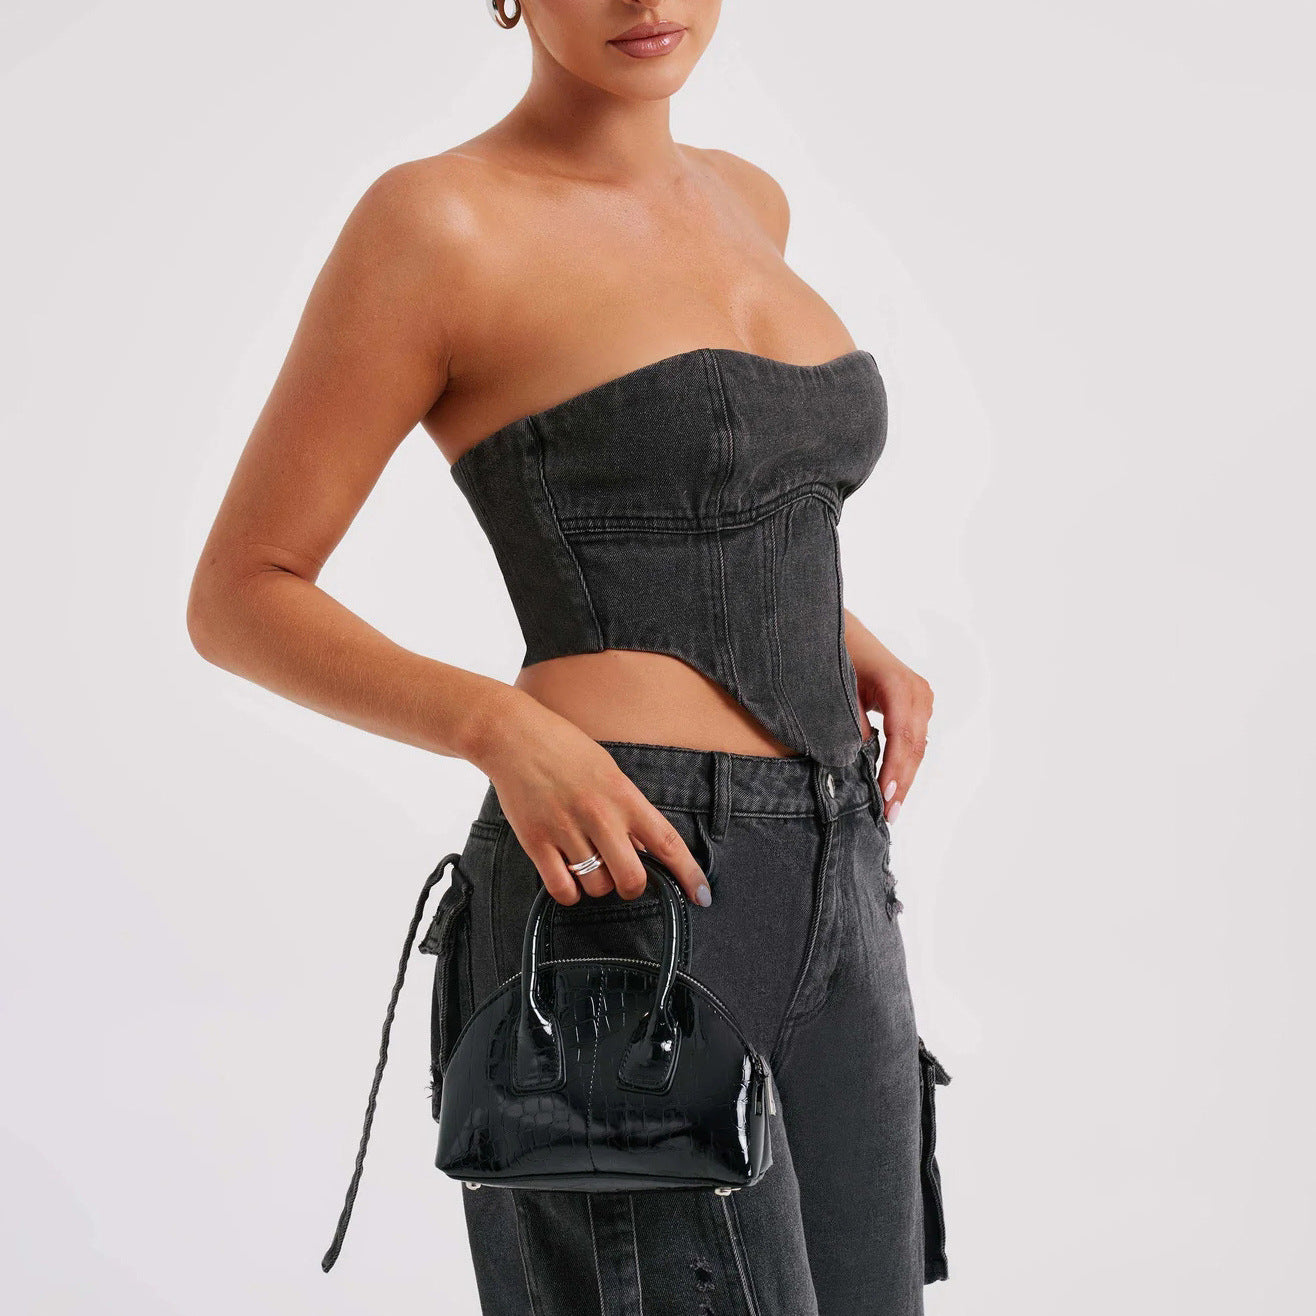 Stylish Low Waist Tube Top and Pocket Stitching Jeans for Women